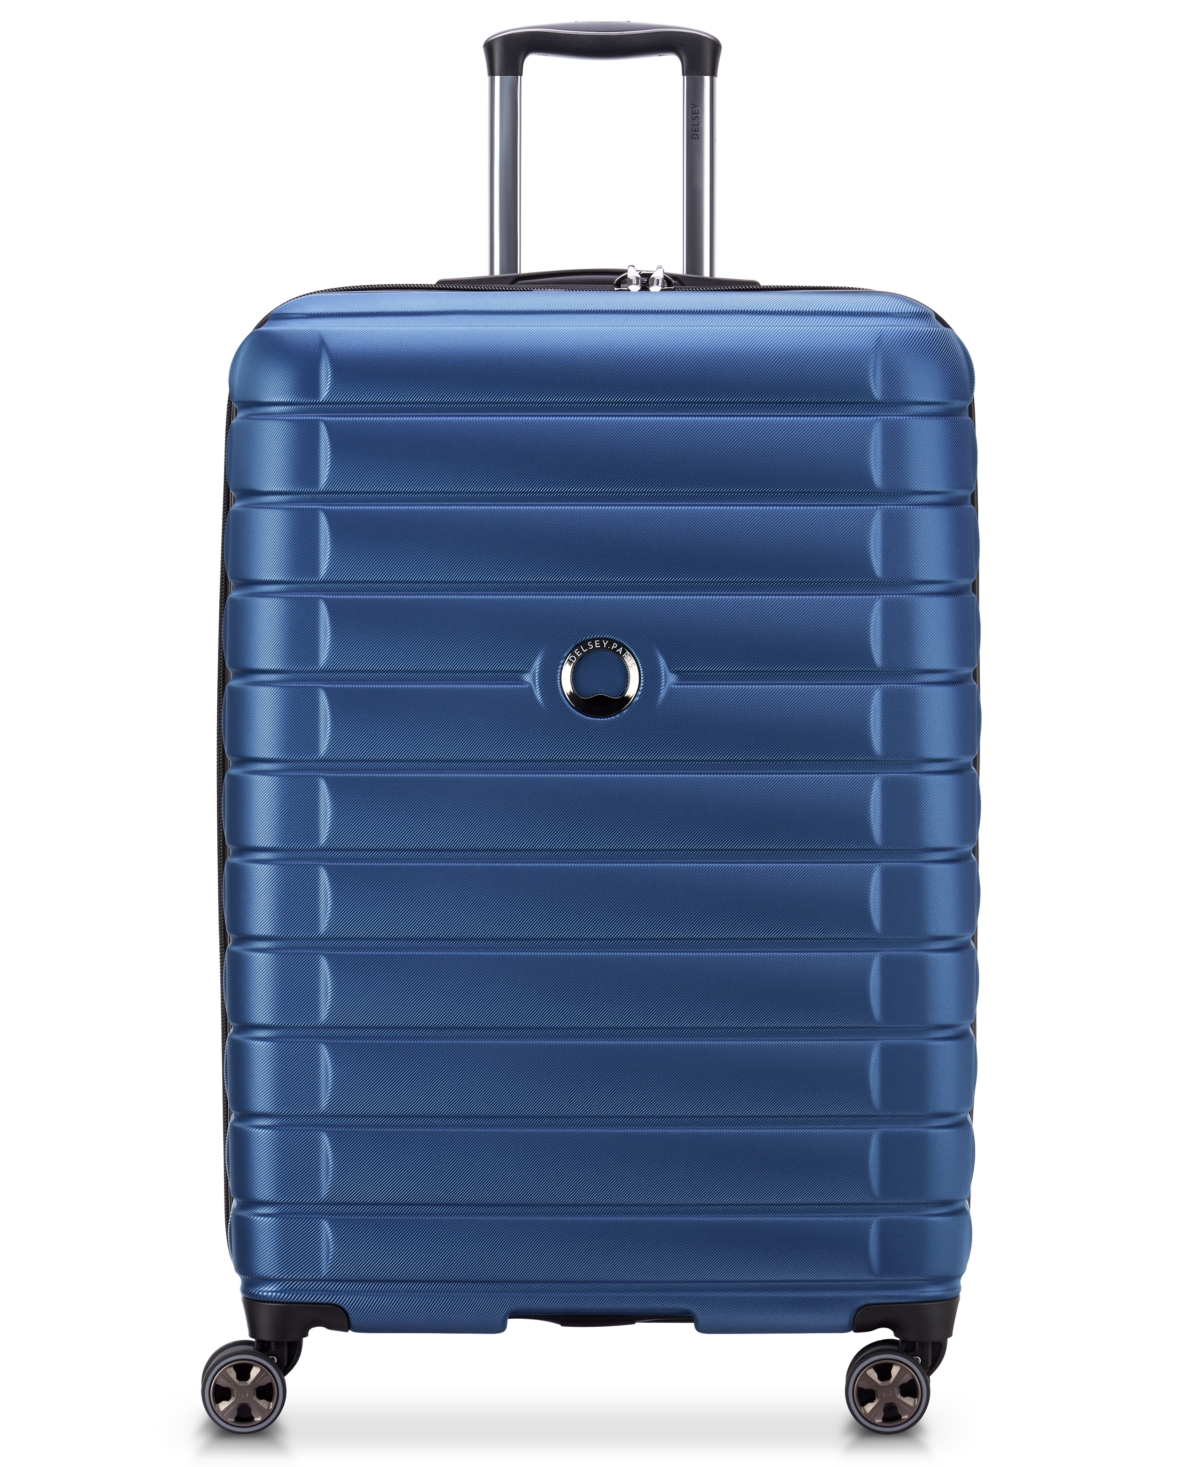 Delsey Shadow 5.0 Expandable 27" Check-in Spinner Luggage In Cobalt Blue